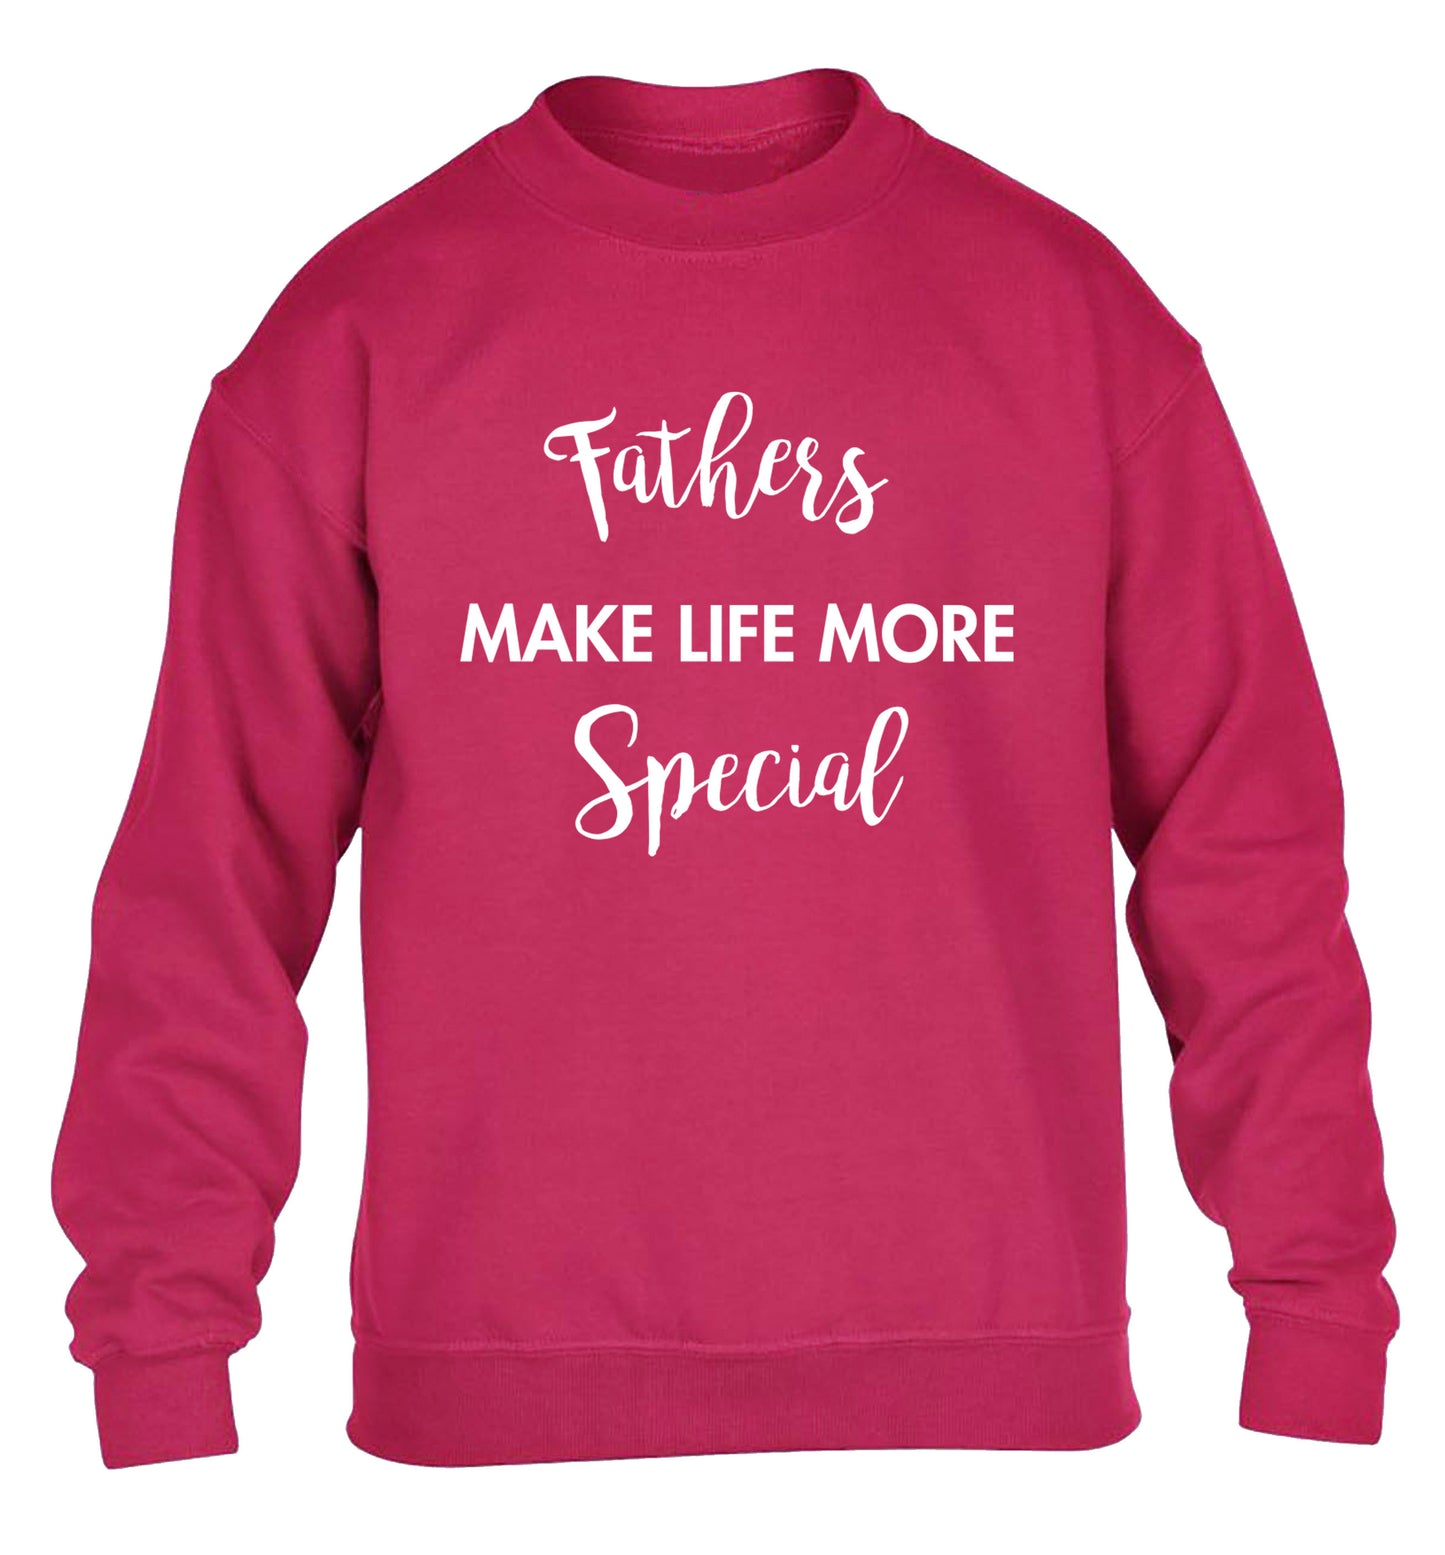 Fathers make life more special children's pink sweater 12-14 Years